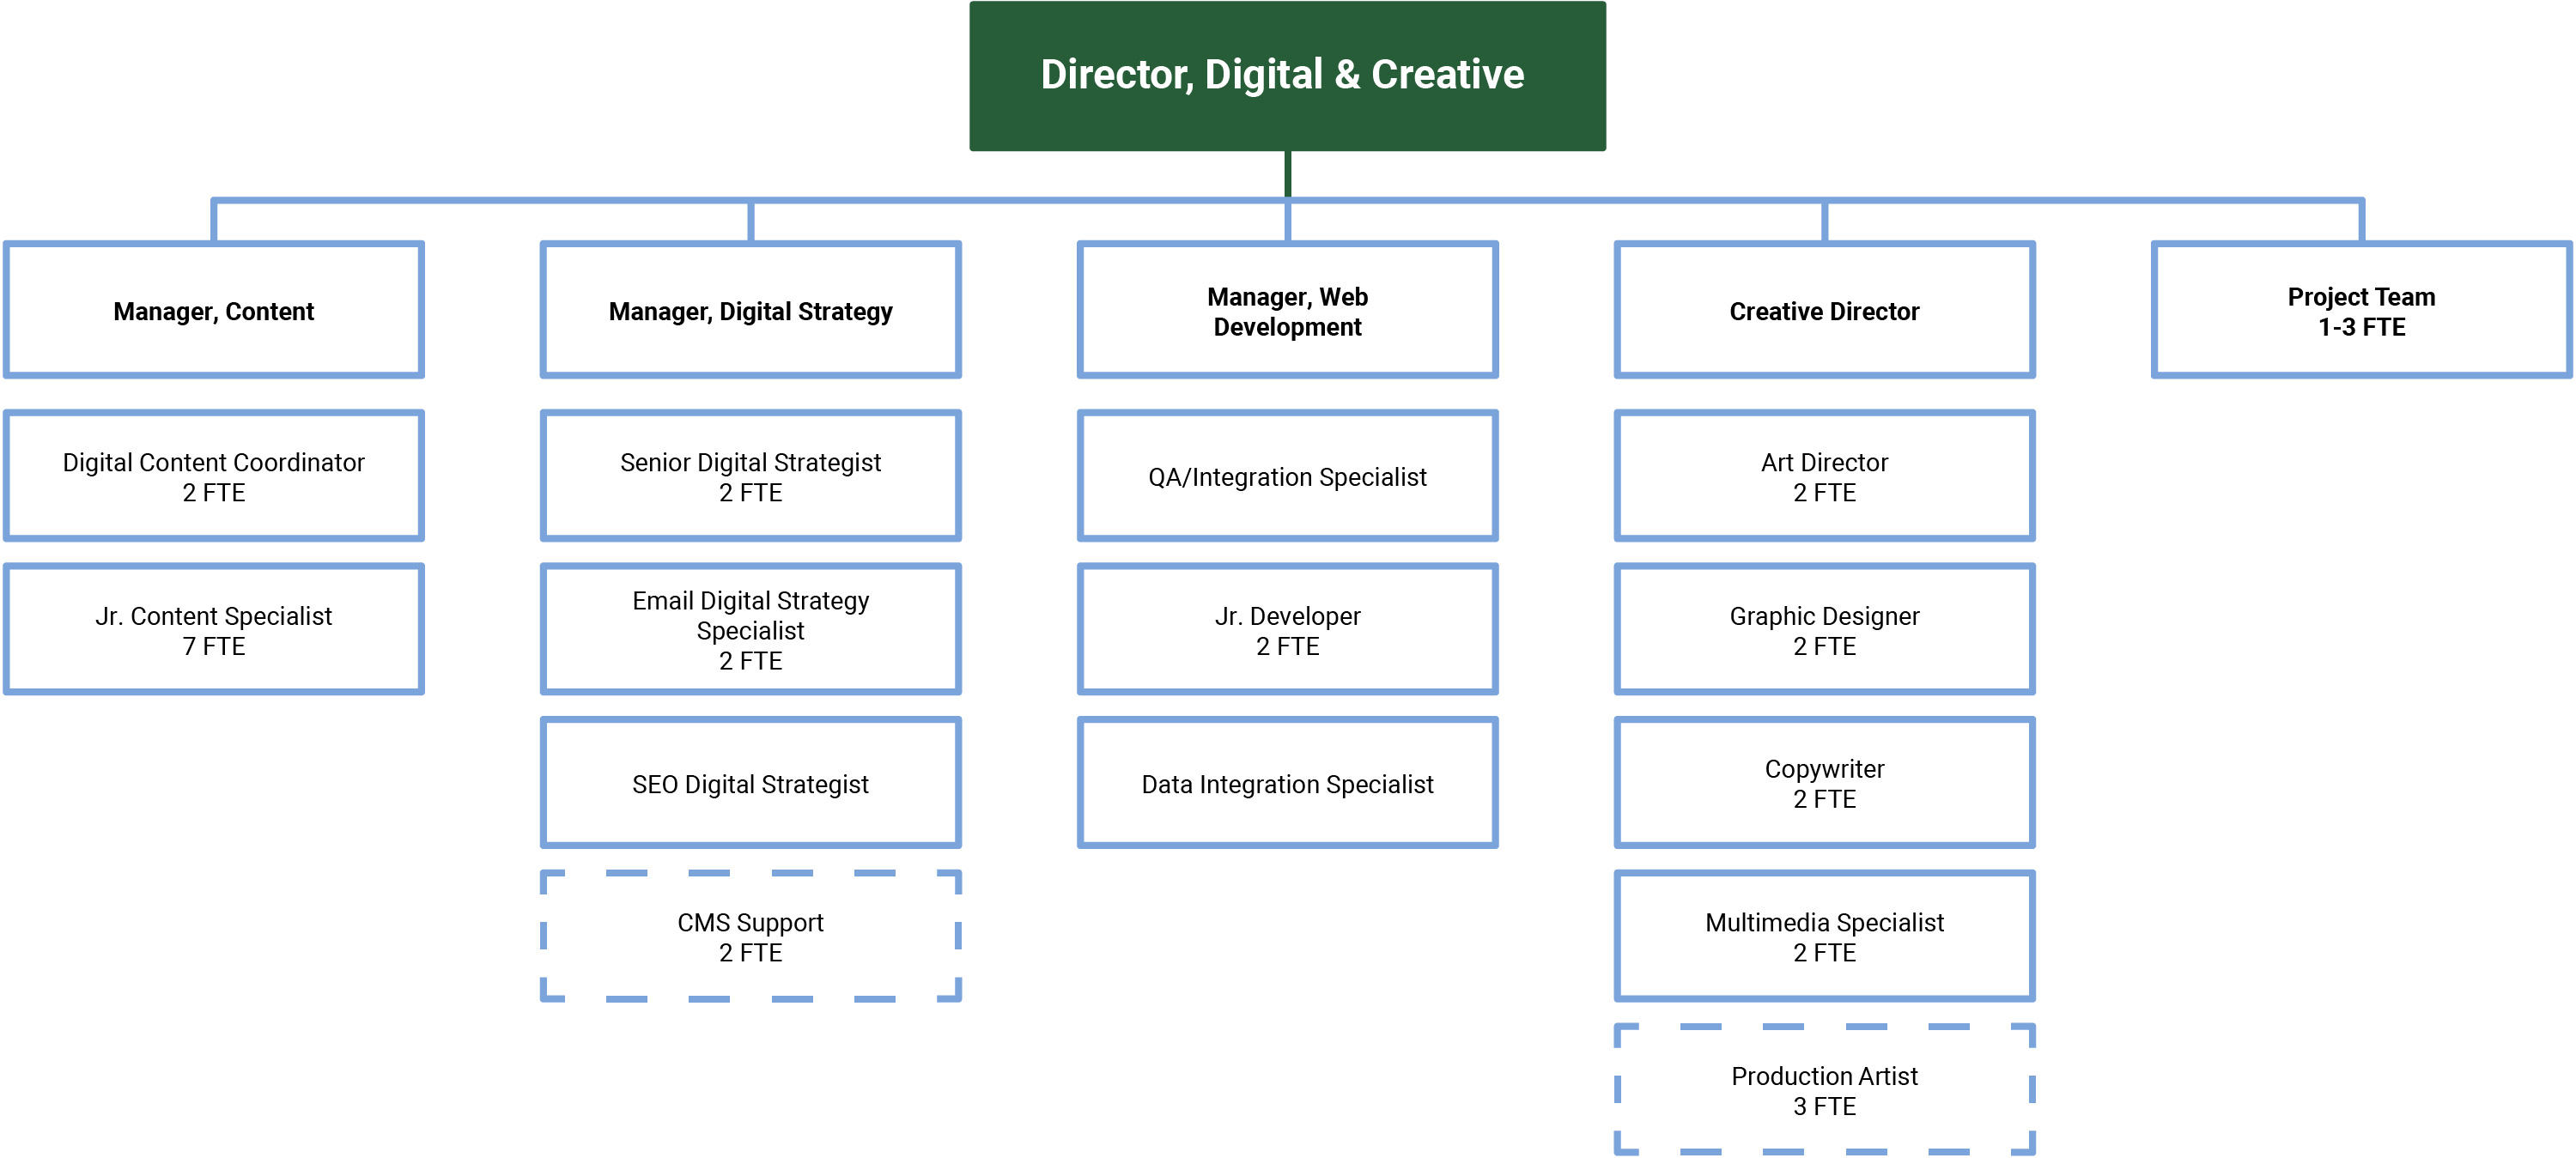 Structure for the Director, Digital & Creative unit